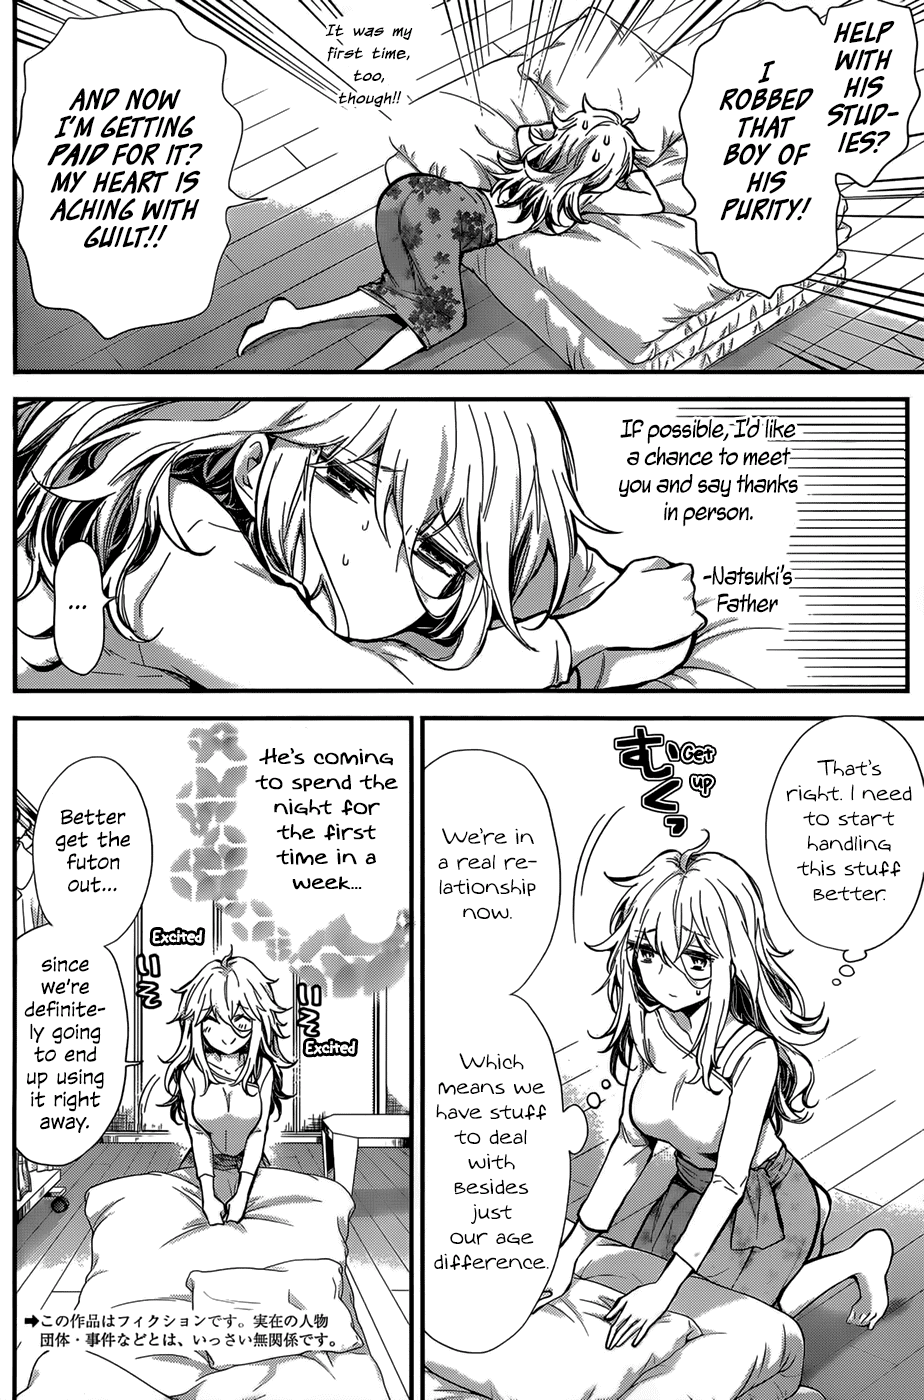 Shingeki No Eroko-San Chapter 25: Perversion 25: Currently Accepting Suggestions On How To Control My Libido While On A Wholesome Date With My Boyfriend - Picture 2